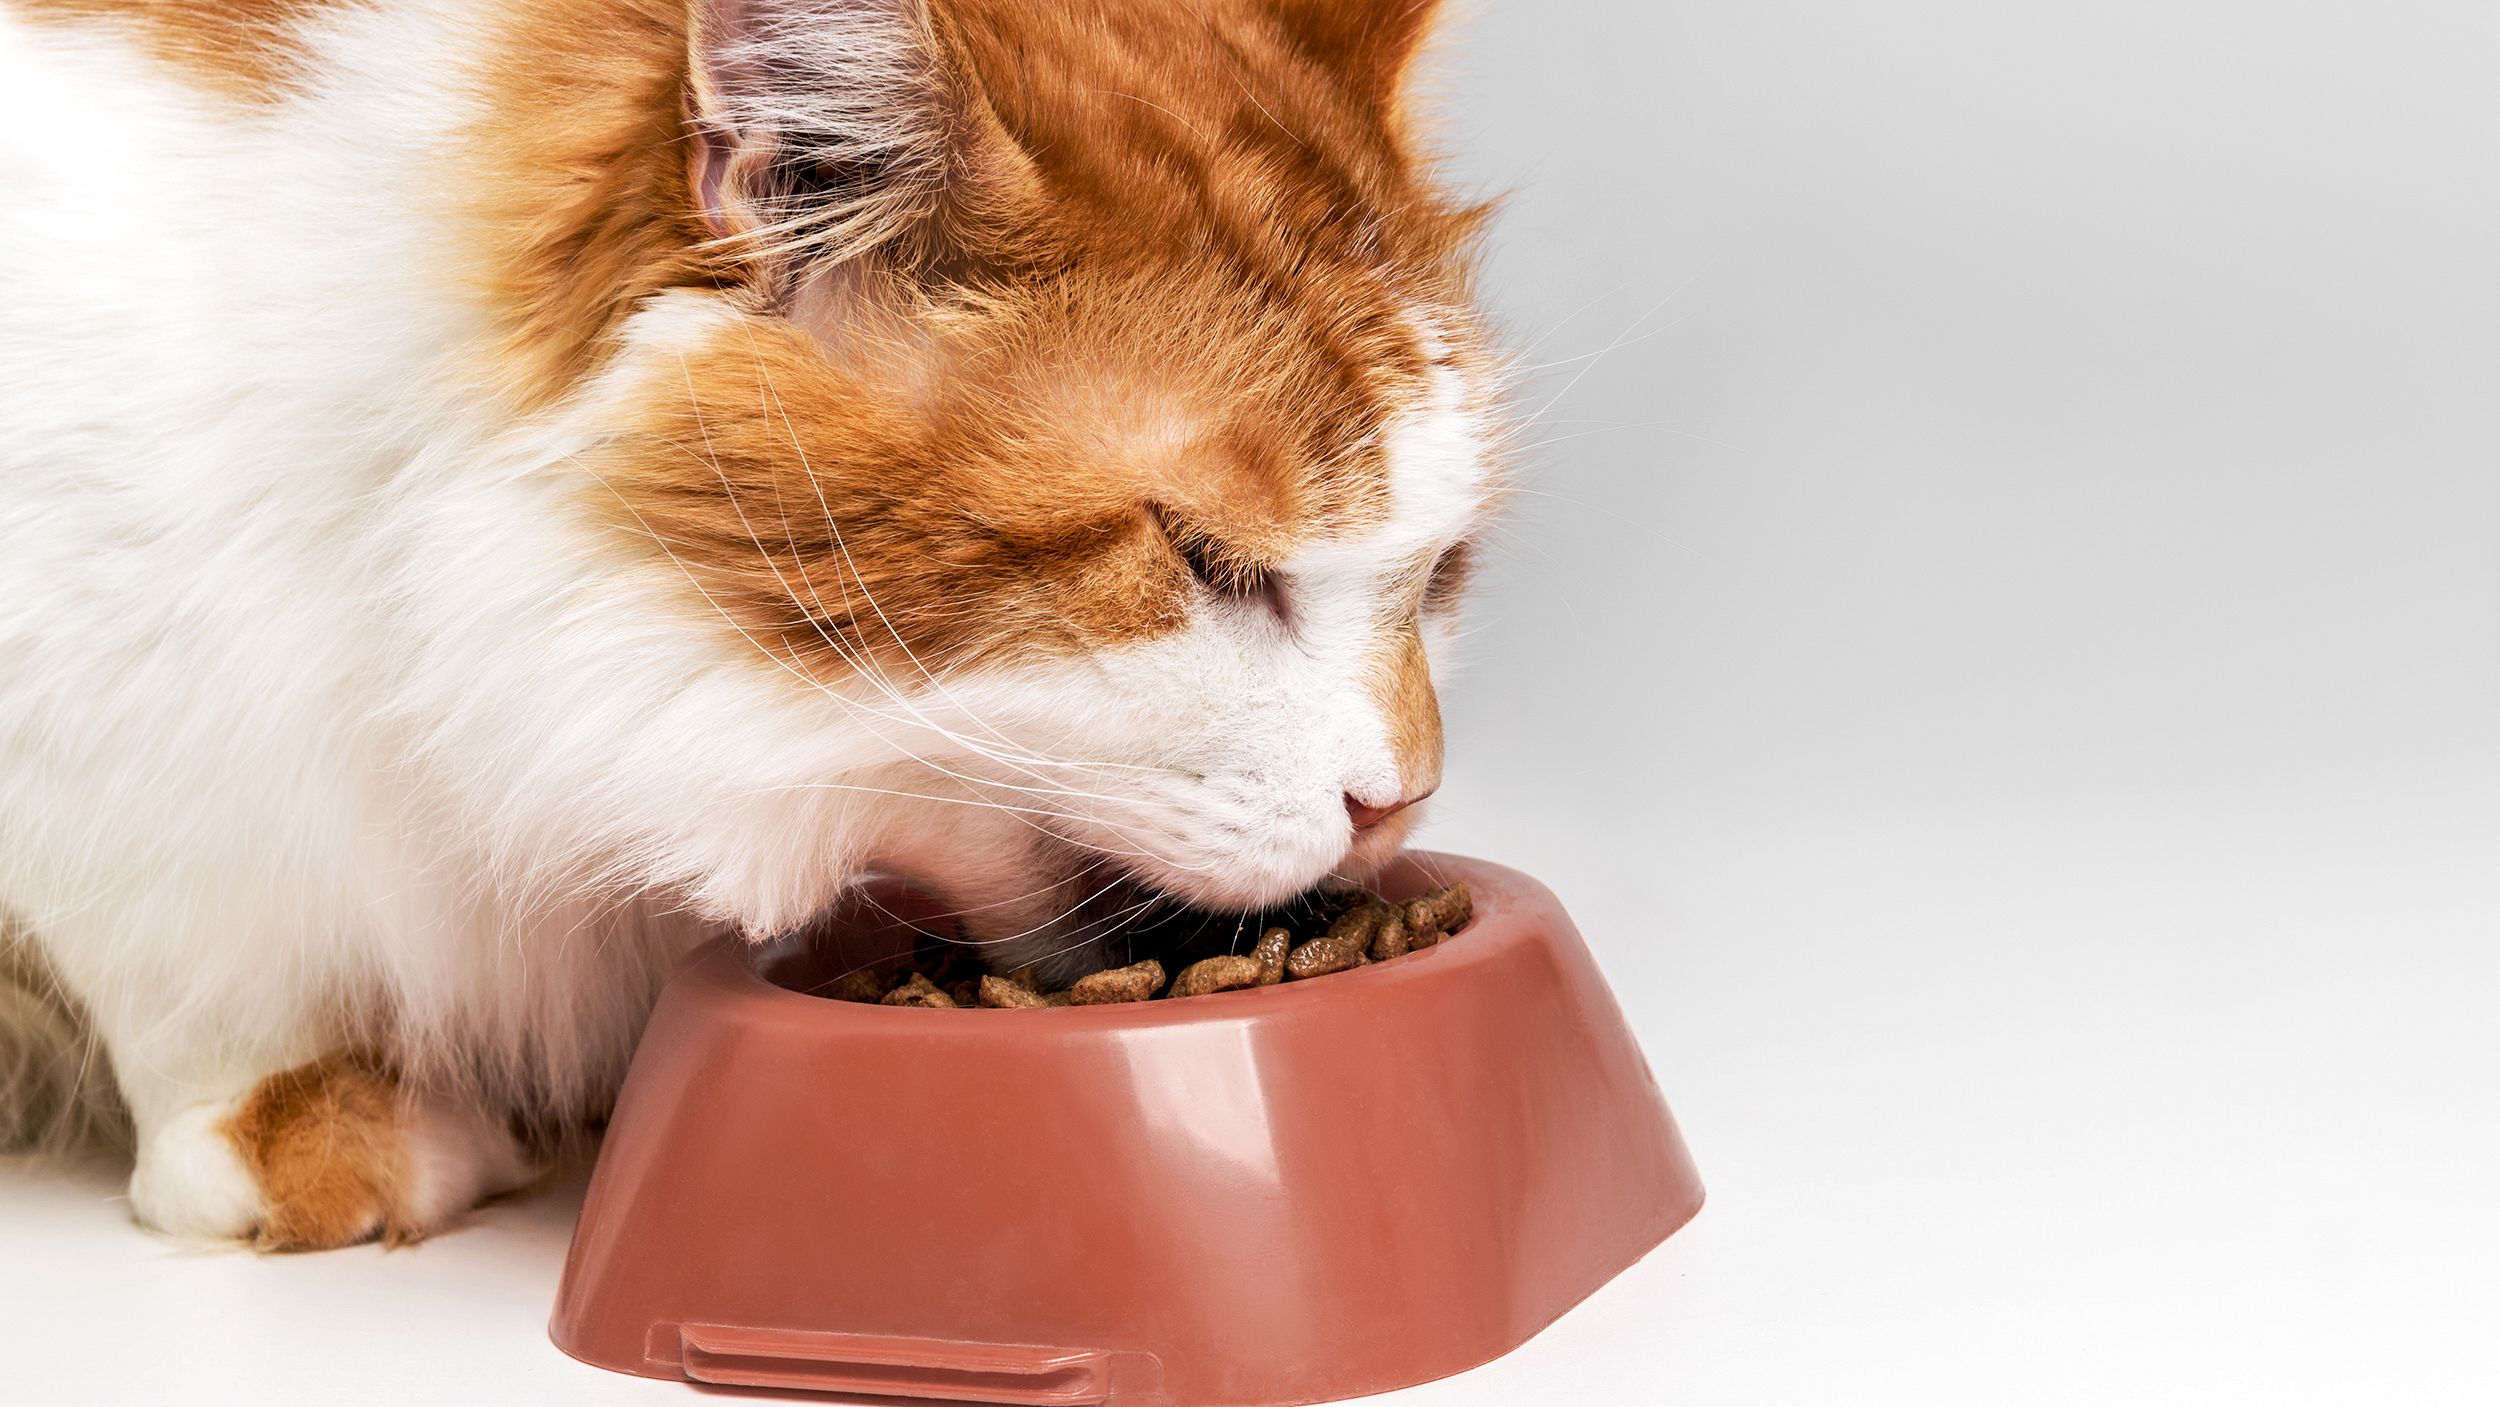 ec60a how to prevent an upset stomach in your cat article cat